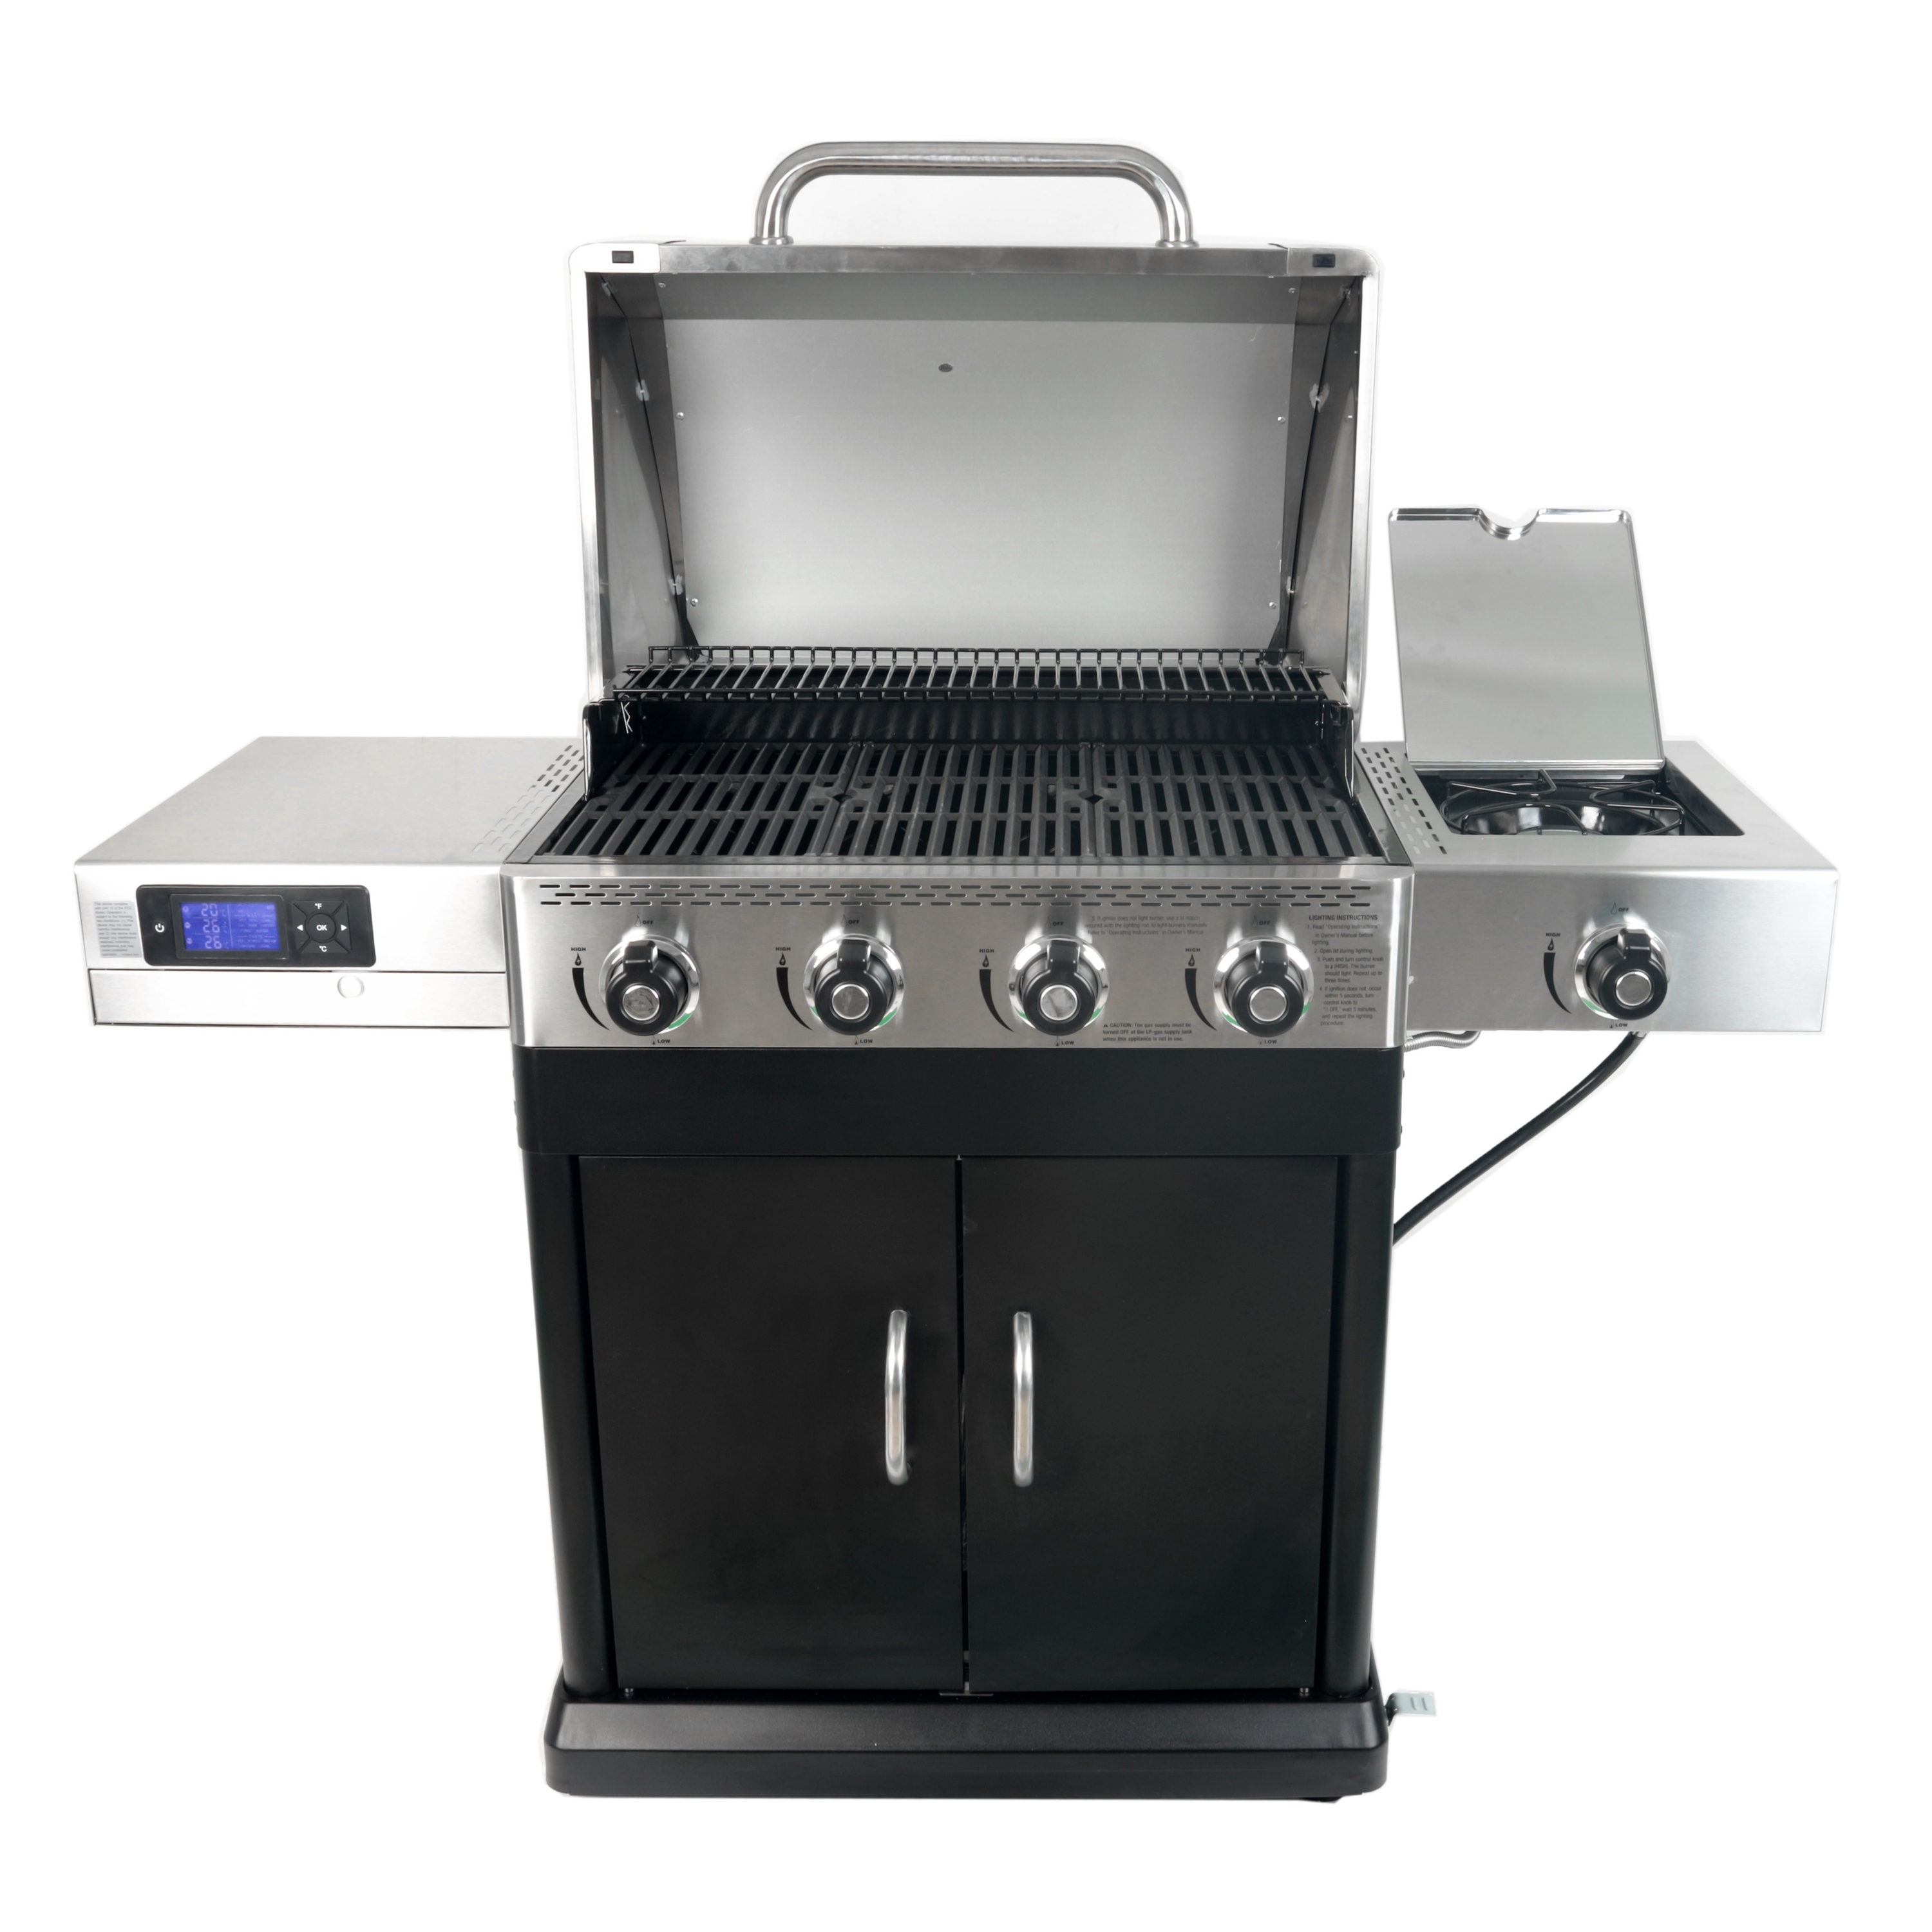  MASTER COOK Outdoor Propane Gas Grill, 4-Burner Gas